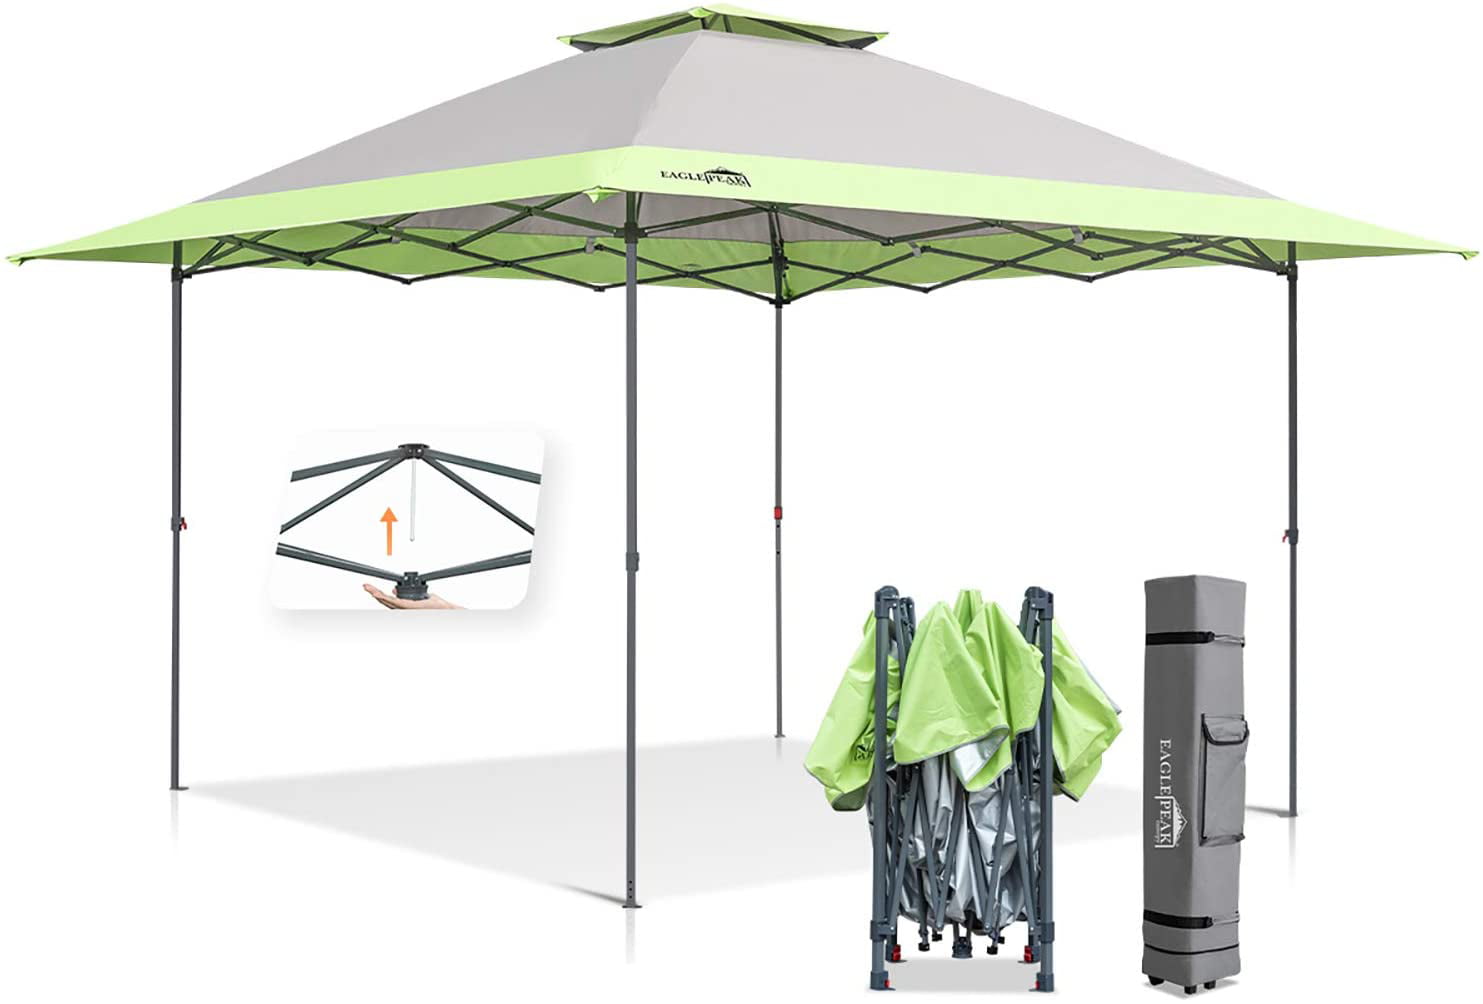 Eagle Peak 13x13 Straight Leg Pop Up Canopy Tent Instant Outdoor